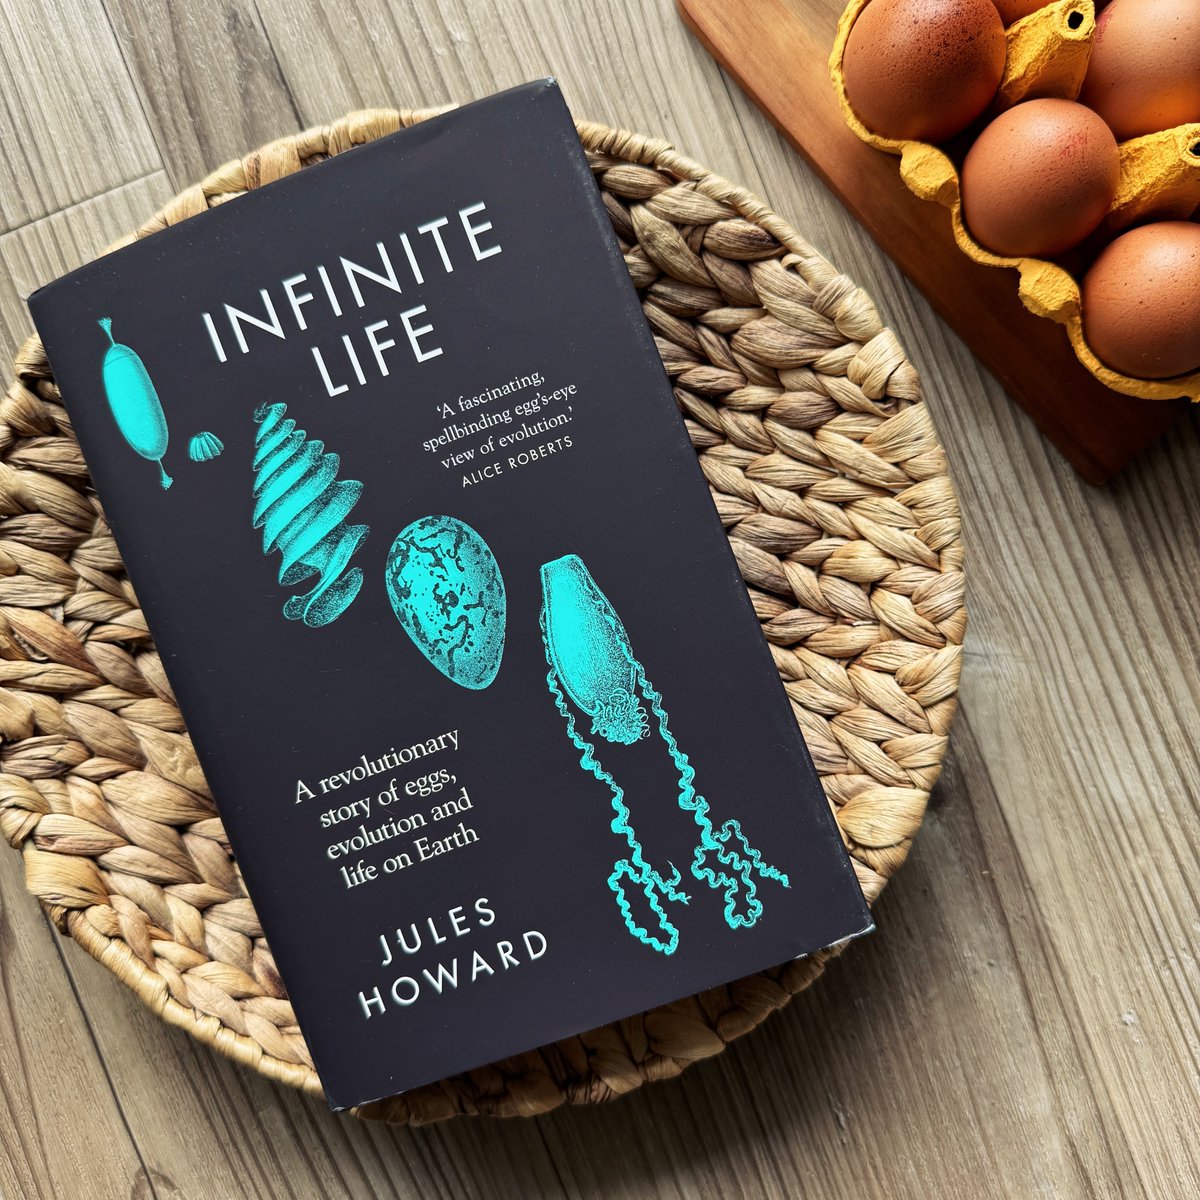 Here are just a few of the *egg-cellent* endorsements for #InfiniteLife so far! ‘Jules Howard’s egg’s-eye view of evolution is dripping with fascinating insights’ Alice Roberts ‘This is as fun and engaging as science writing gets’ Steve Brusatte ‘A joy to read’ Helen Scales